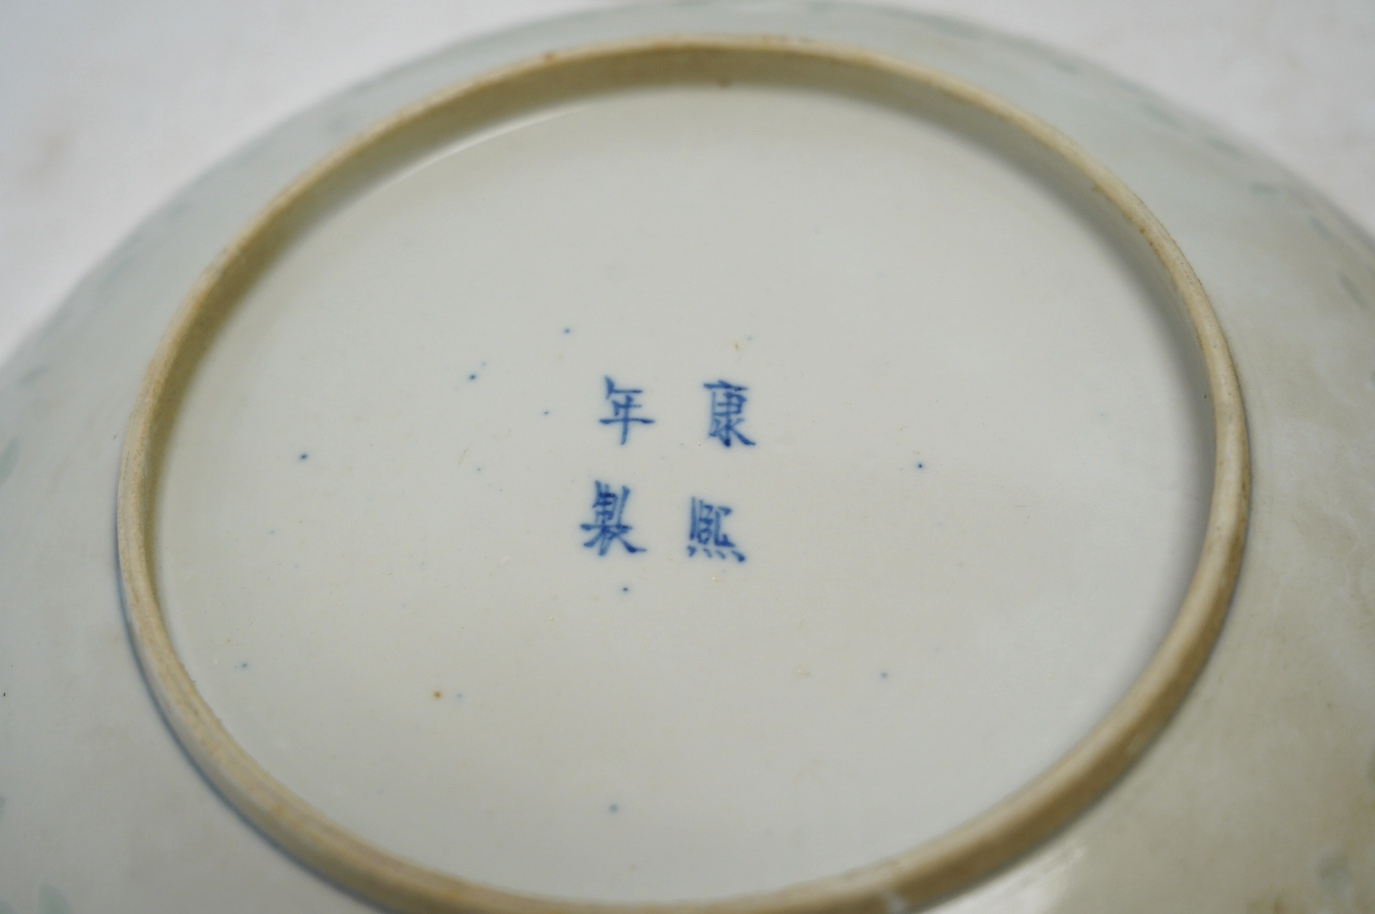 Four Chinese blue and white export plates and a rice bowl, bowl 24.5cm diameter. Condition - poor to fair, some damage to the edges